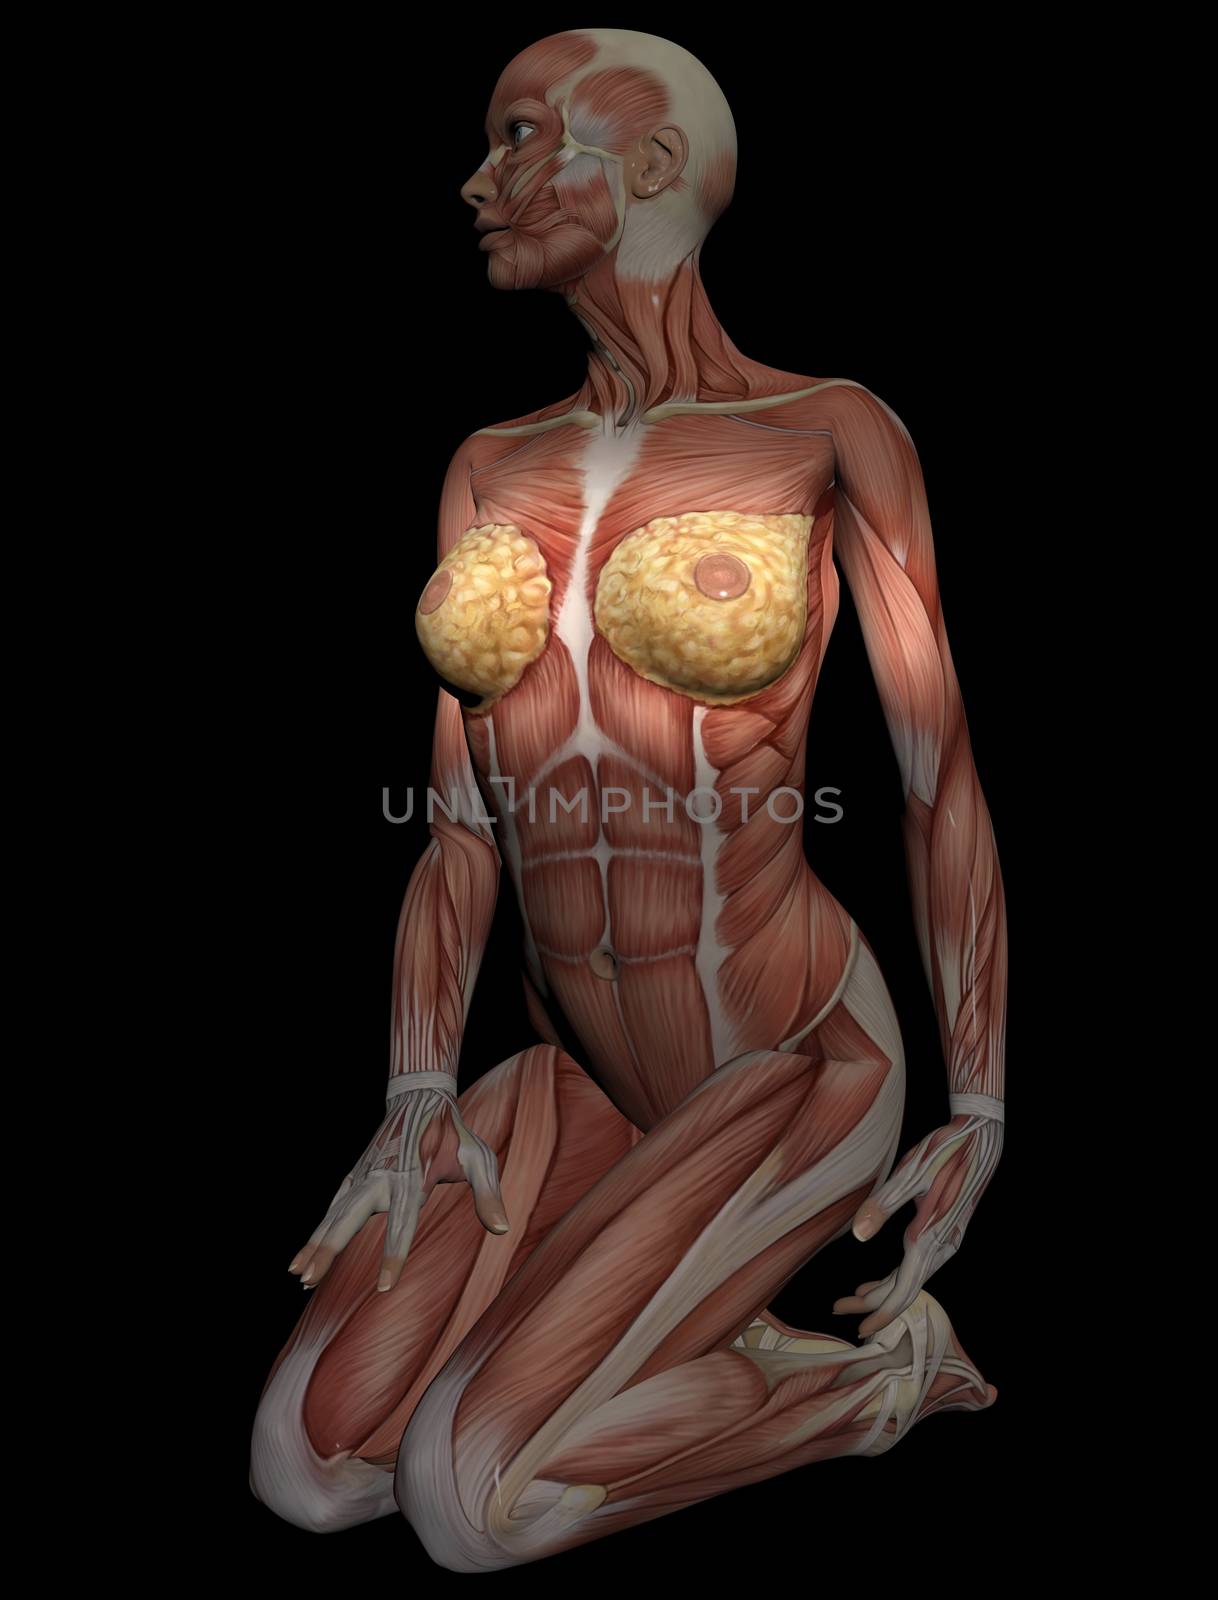 3D model of muscles of female torso for study, with breast in fo by vitanovski